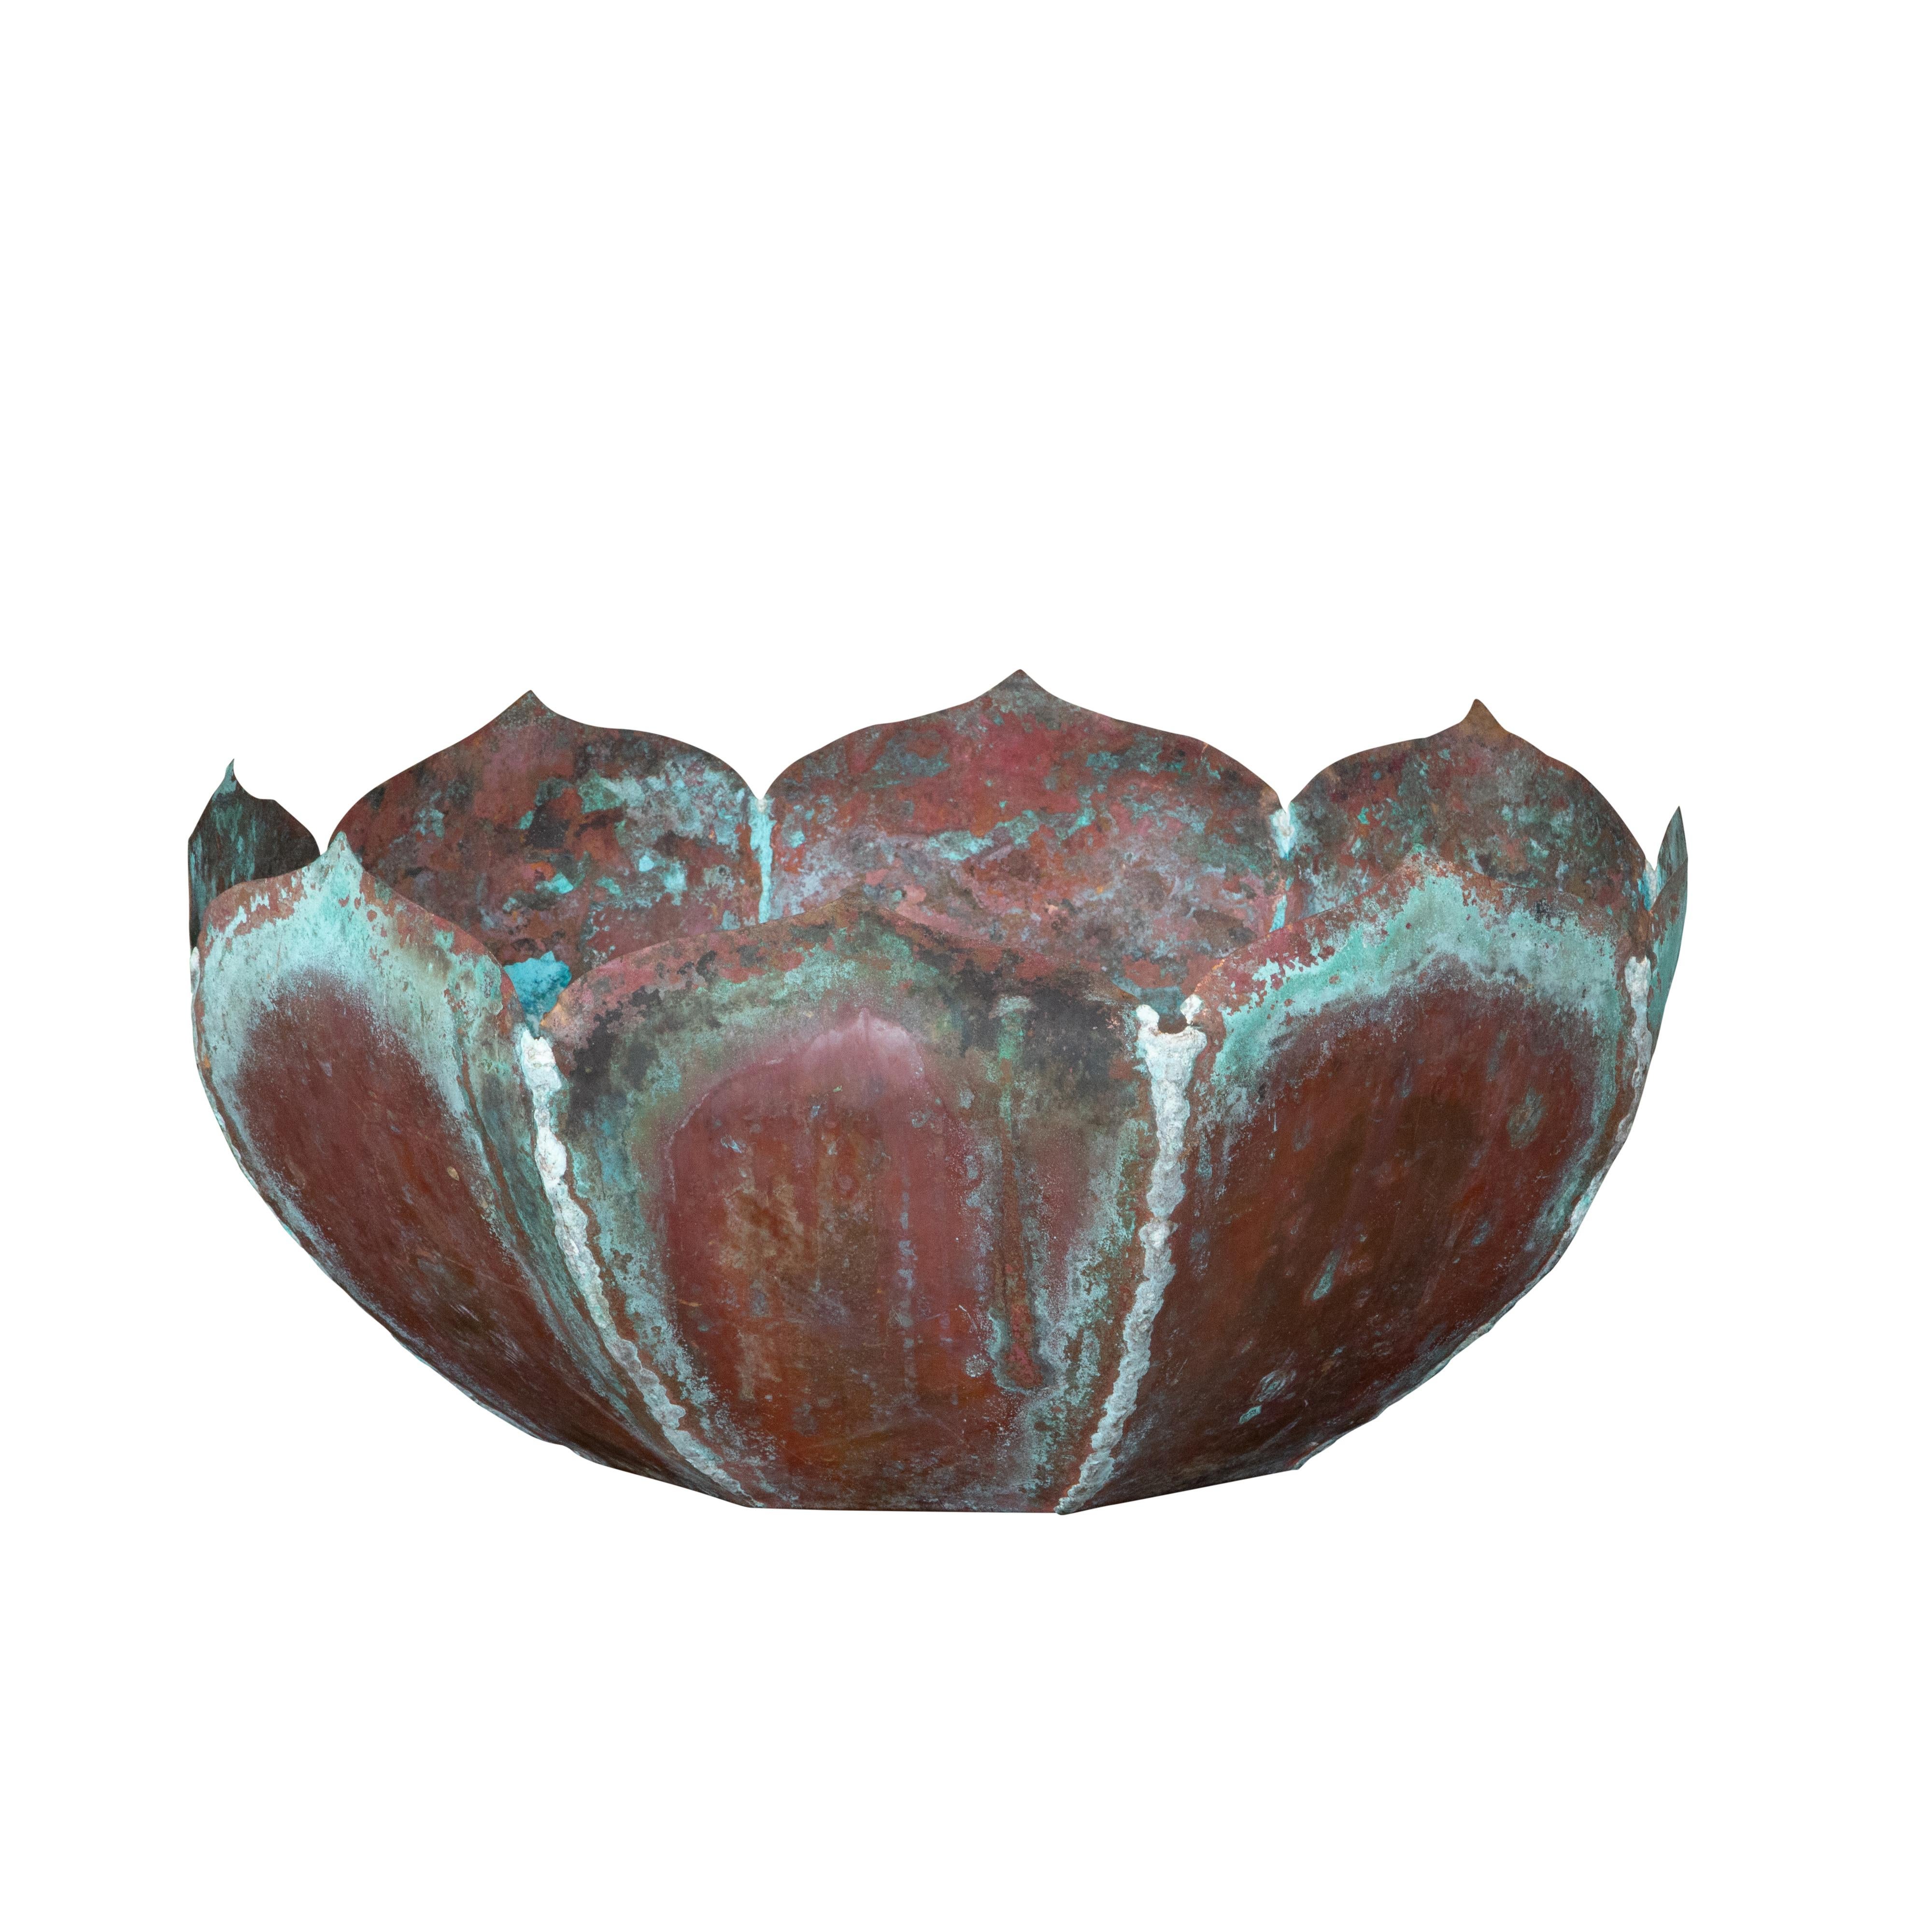 A vintage copper lotus flower shaped decorative bowl from the Mid-20th Century, with verdigris patina adorning the petals. Created during the midcentury period, this rustic decorative bowl attracts our attention with its lotus flower shape and